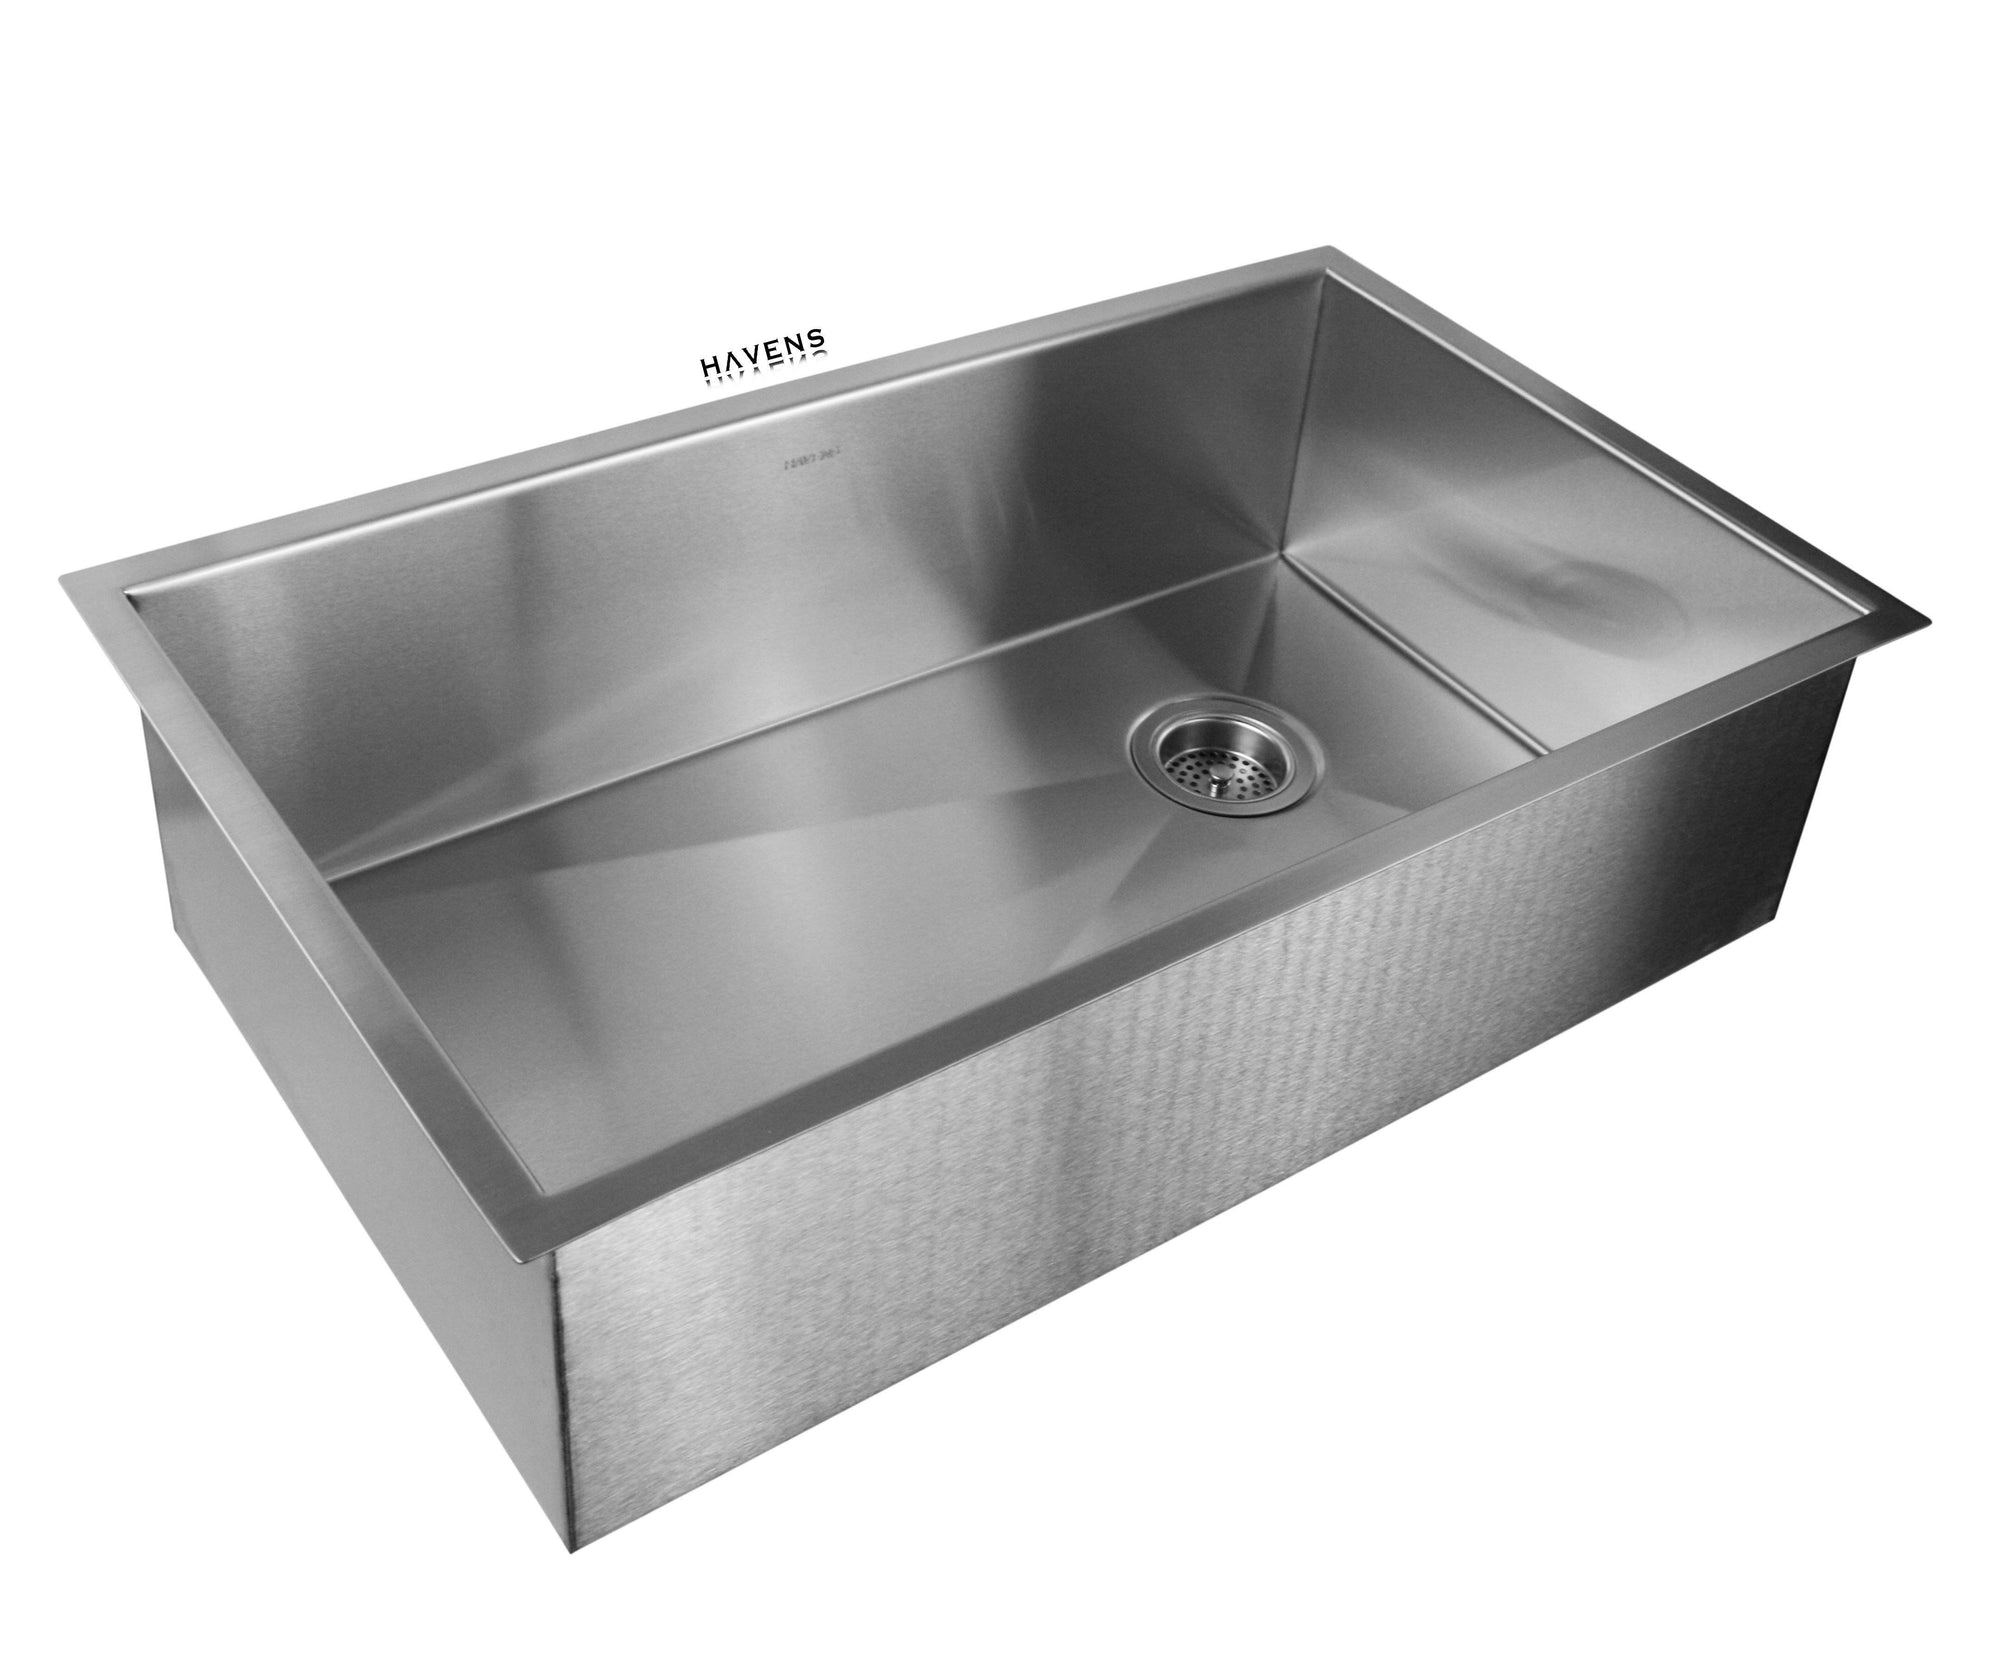 Undermount stainless steel kitchen sink with the signature brushed finish by Havens.